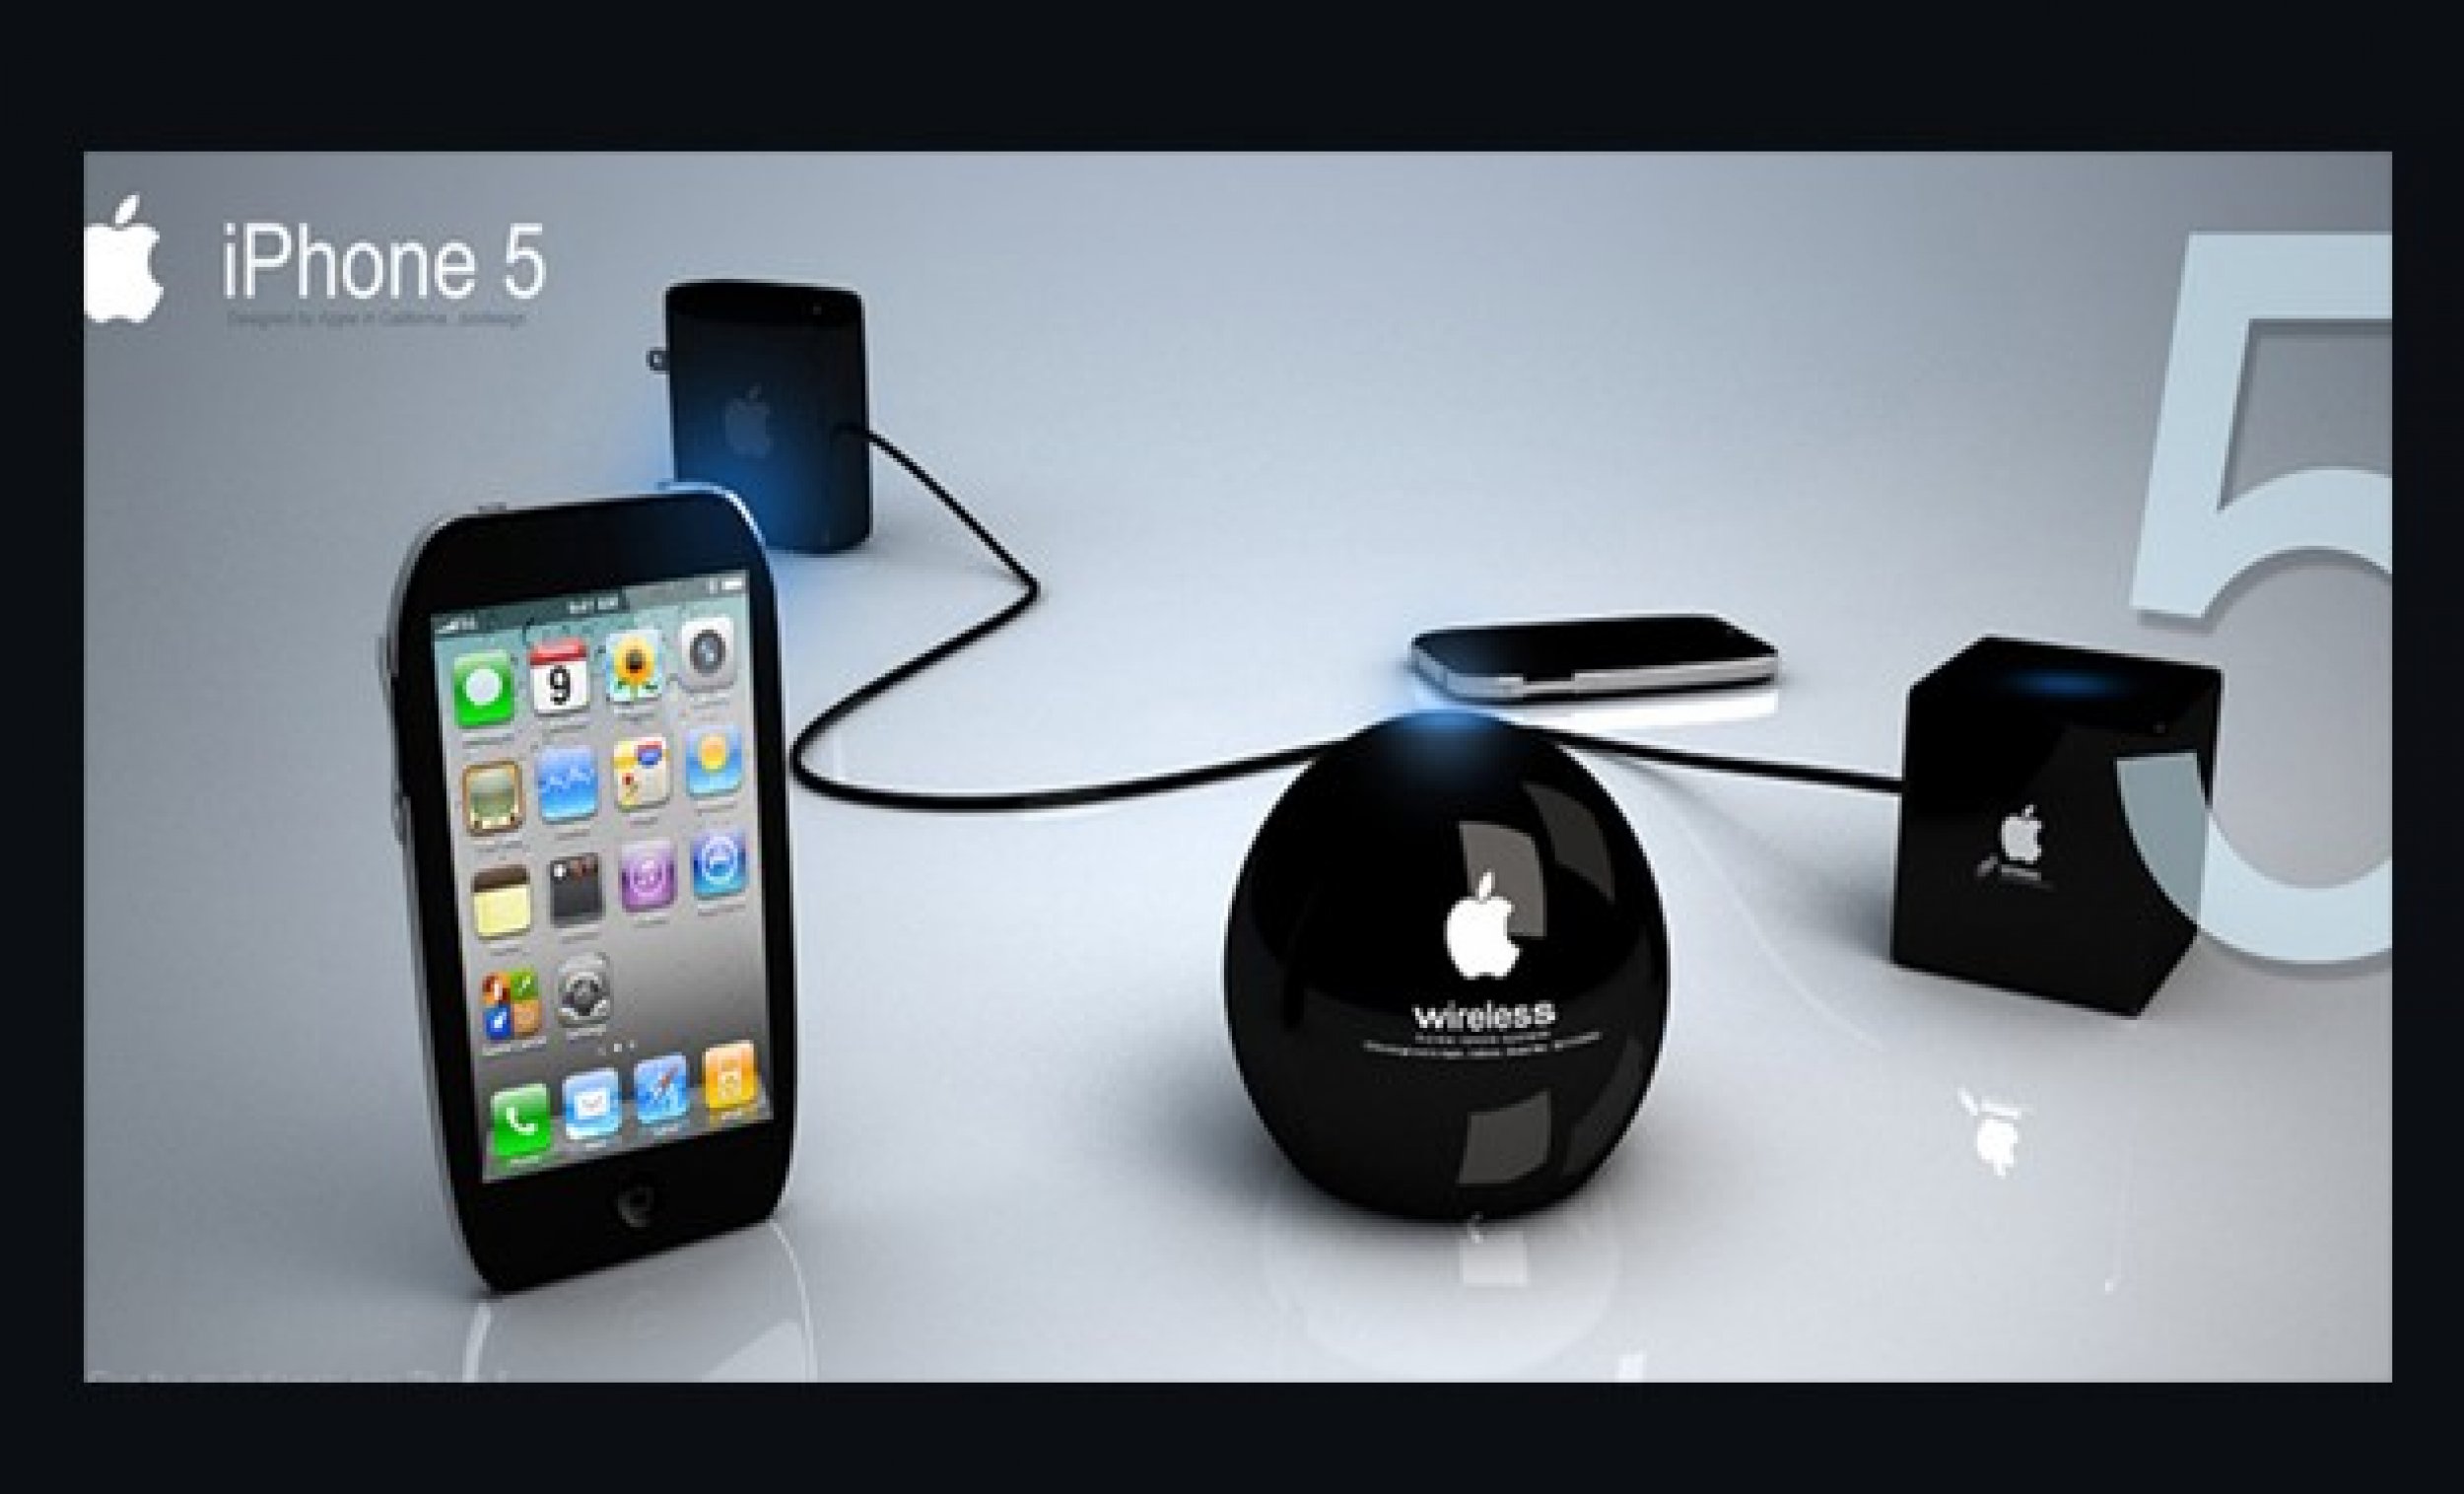 iPhone 5 Concept Design by Chris Youn